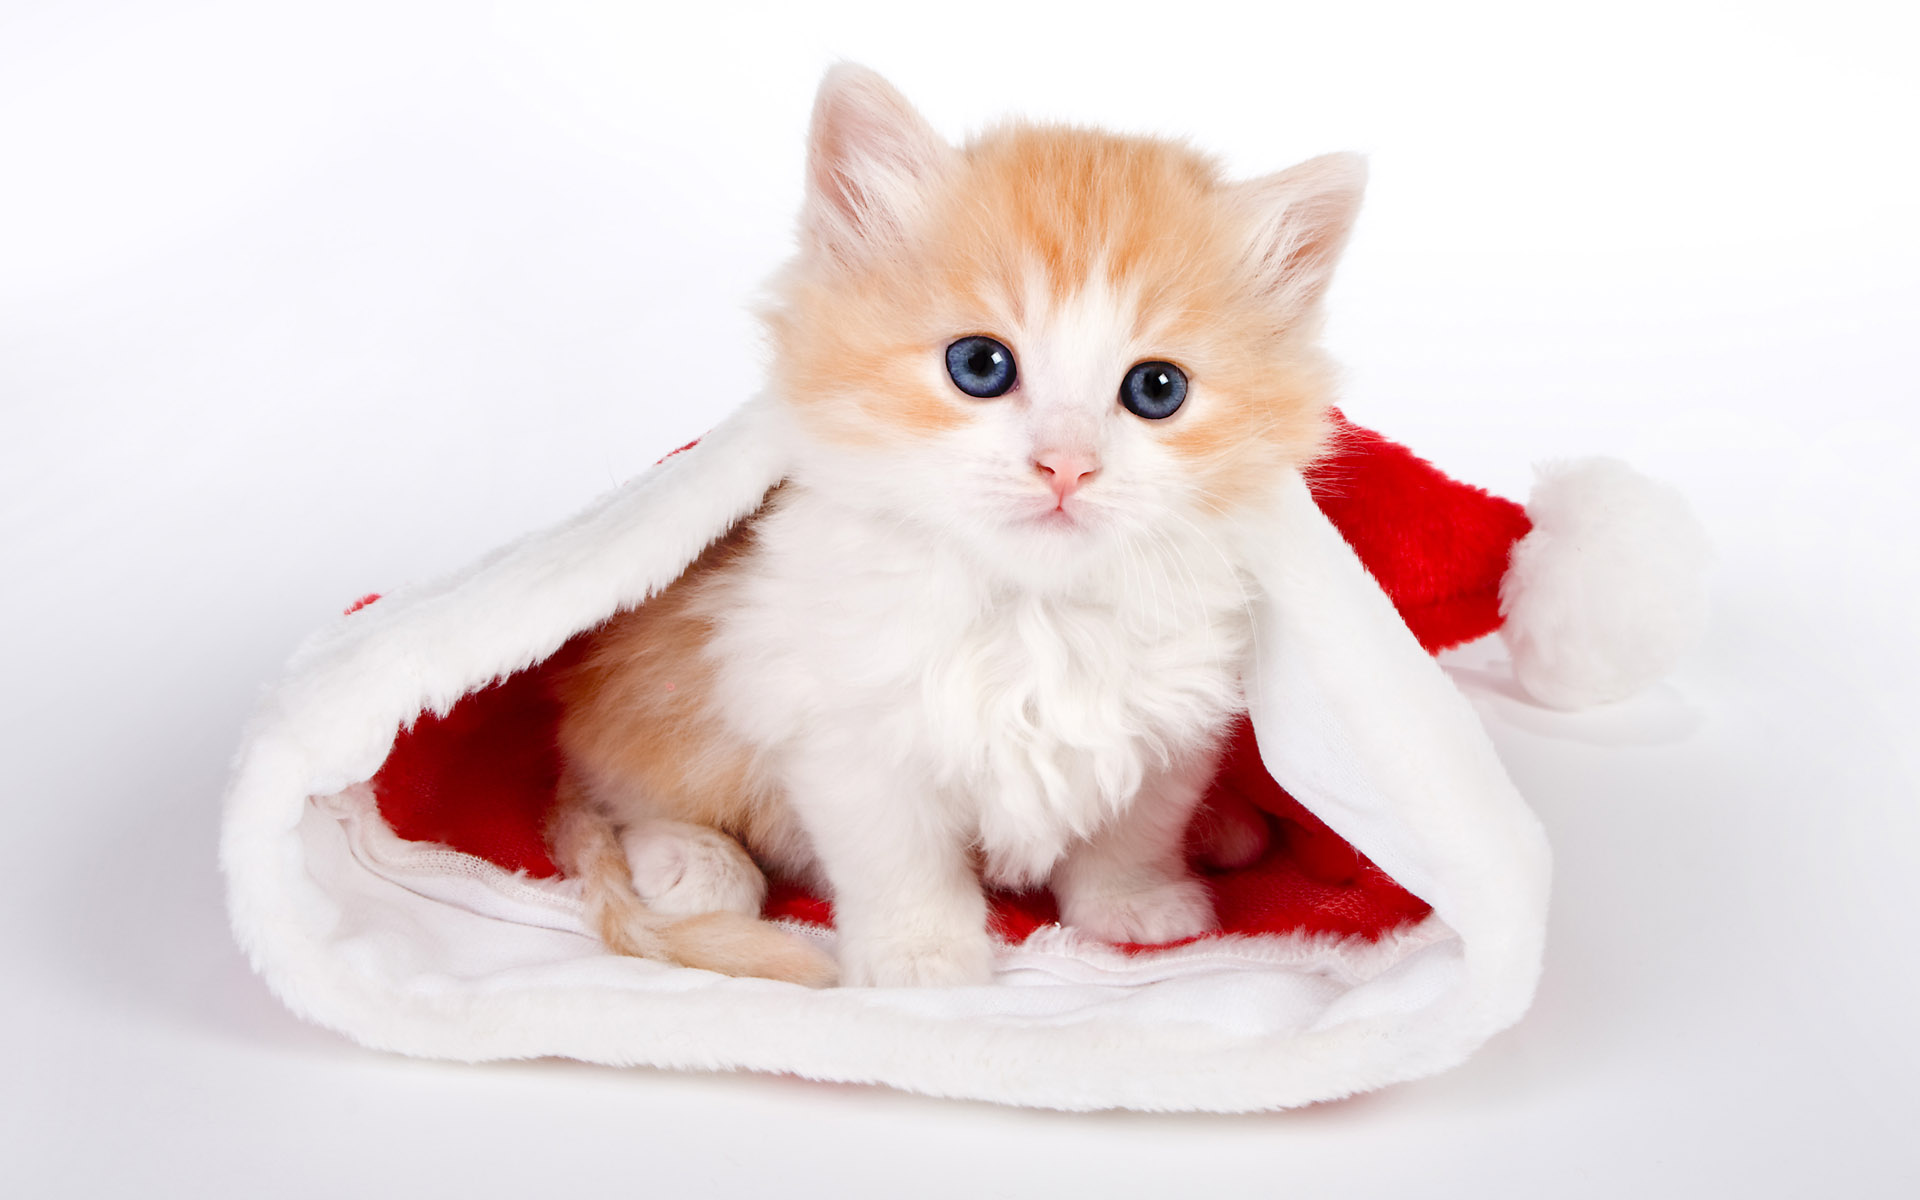 Cute Santa Windows 8.1 Theme and Wallpapers All for Windows 10 Free